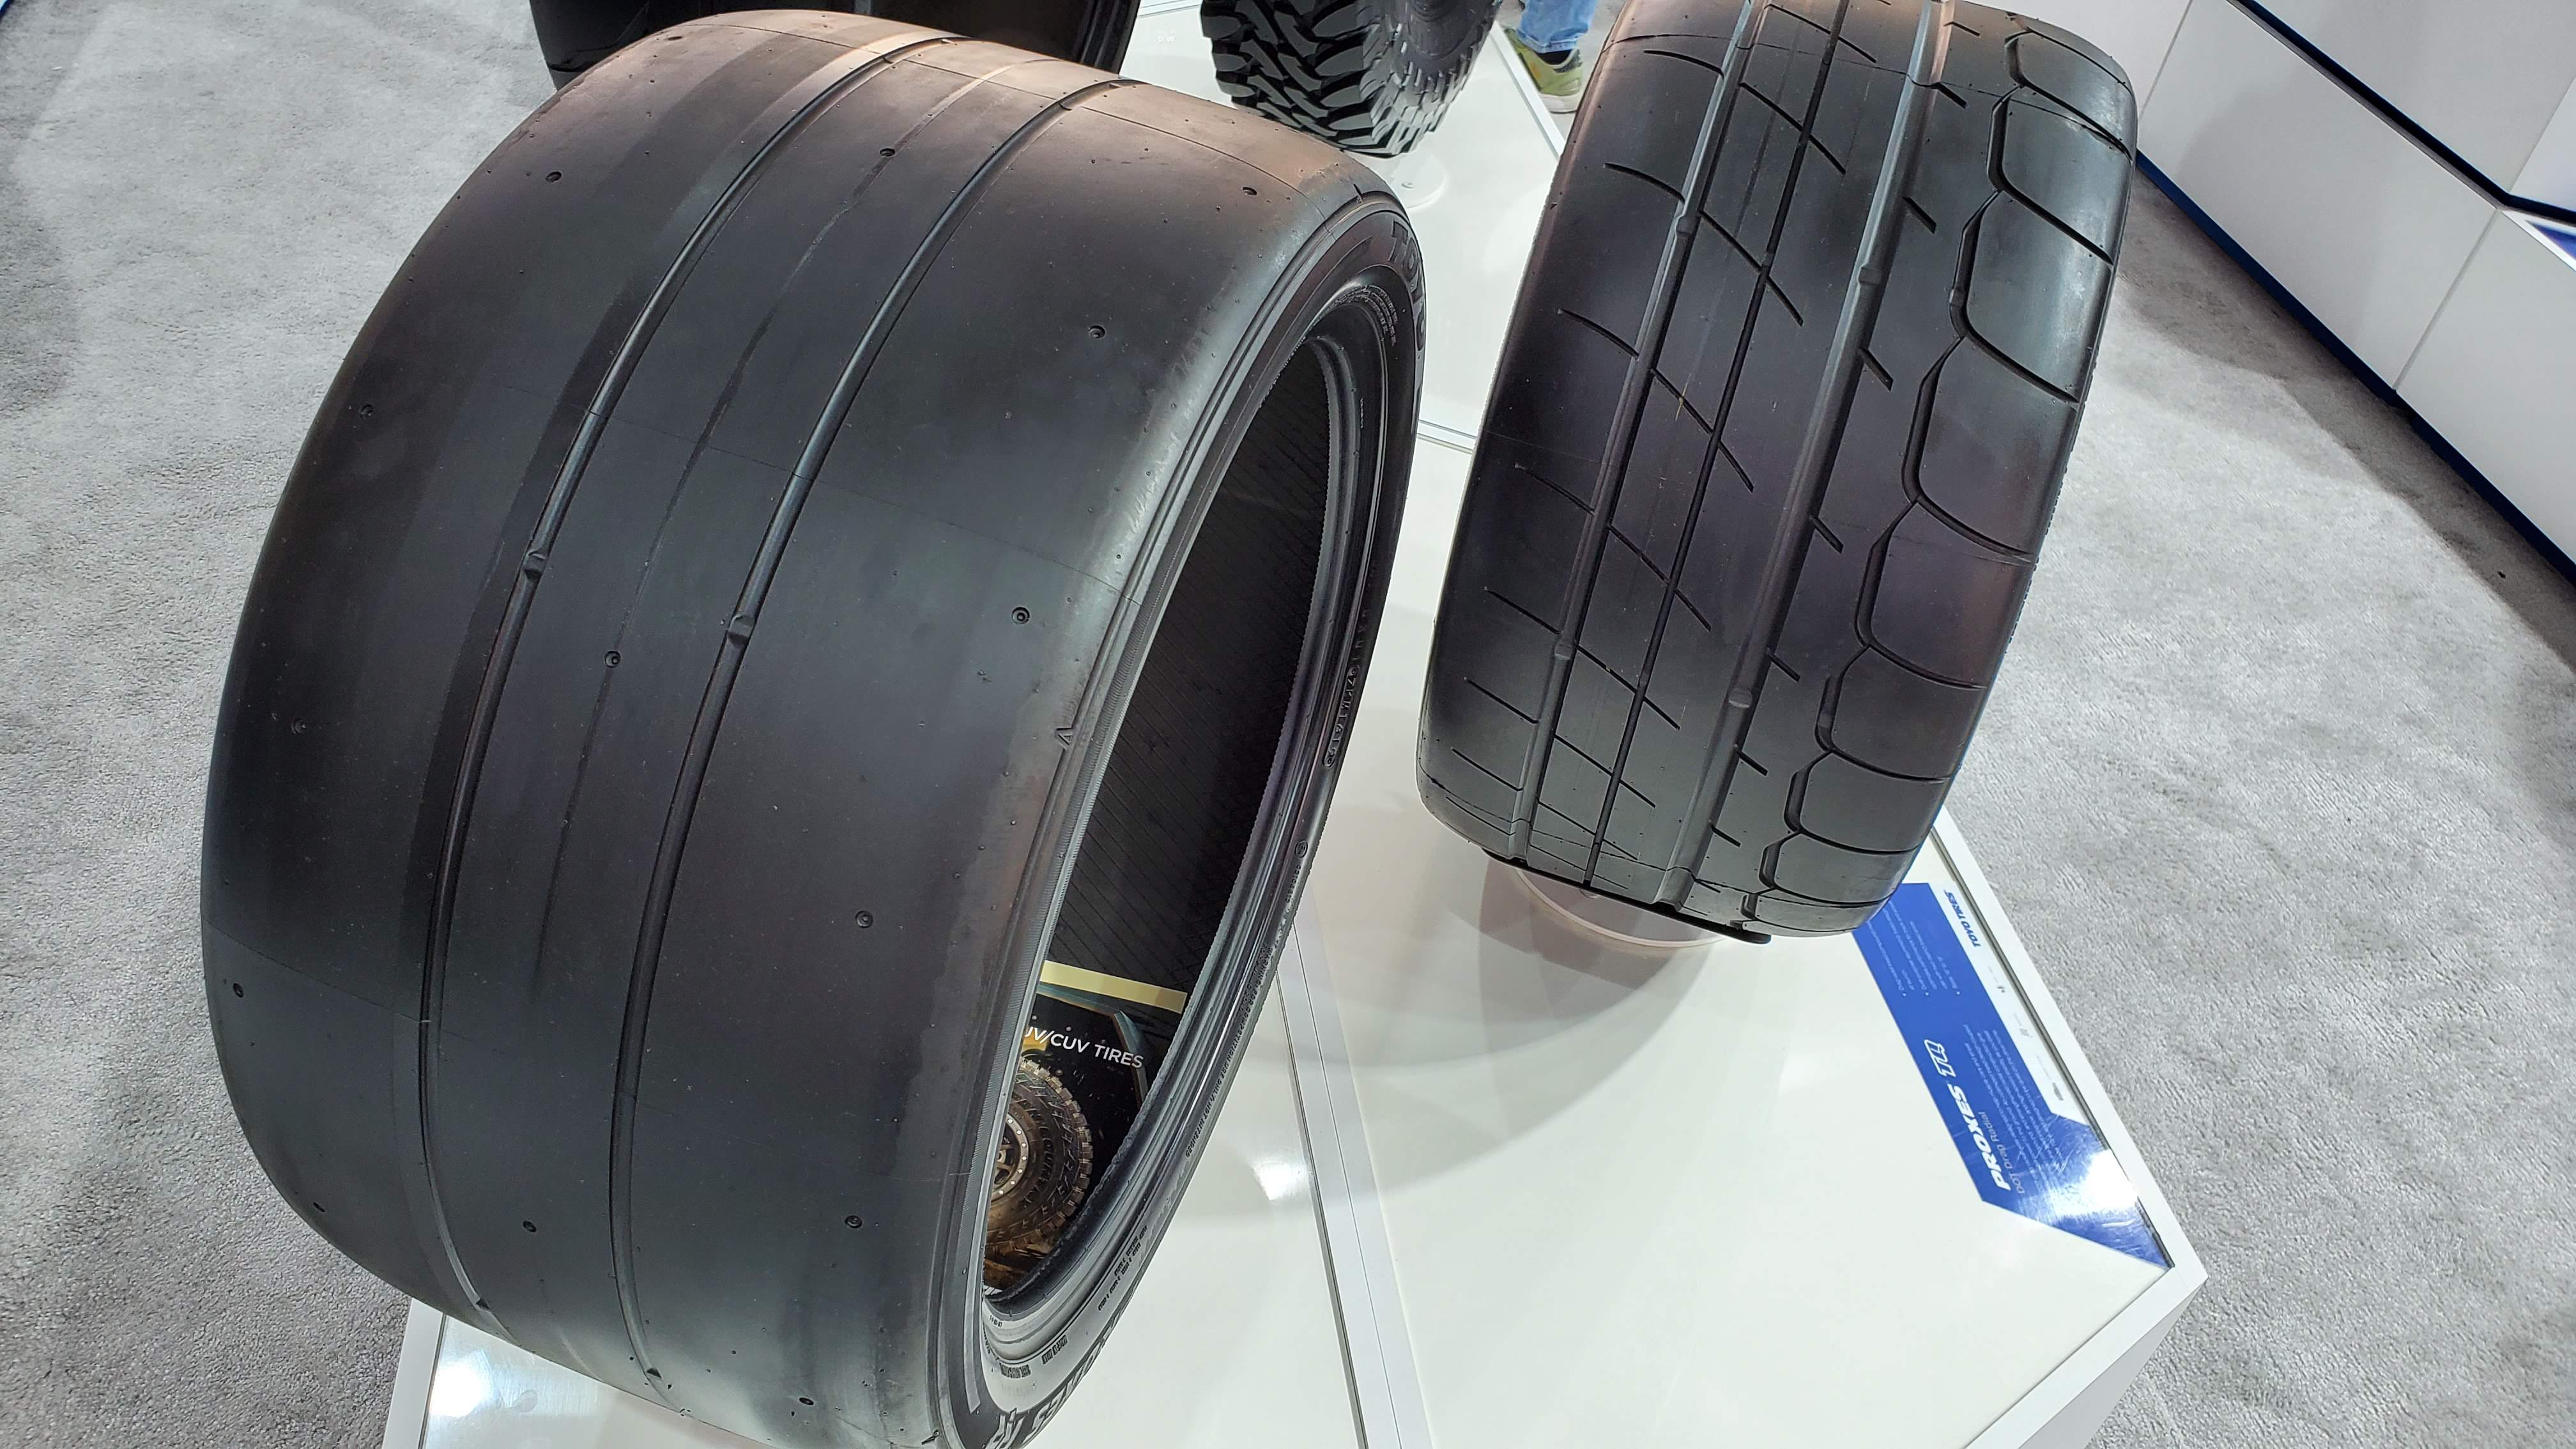 SEMA 2019: Toyo Tires R888R And RR 20-Inch Tire Line, Up To 325s